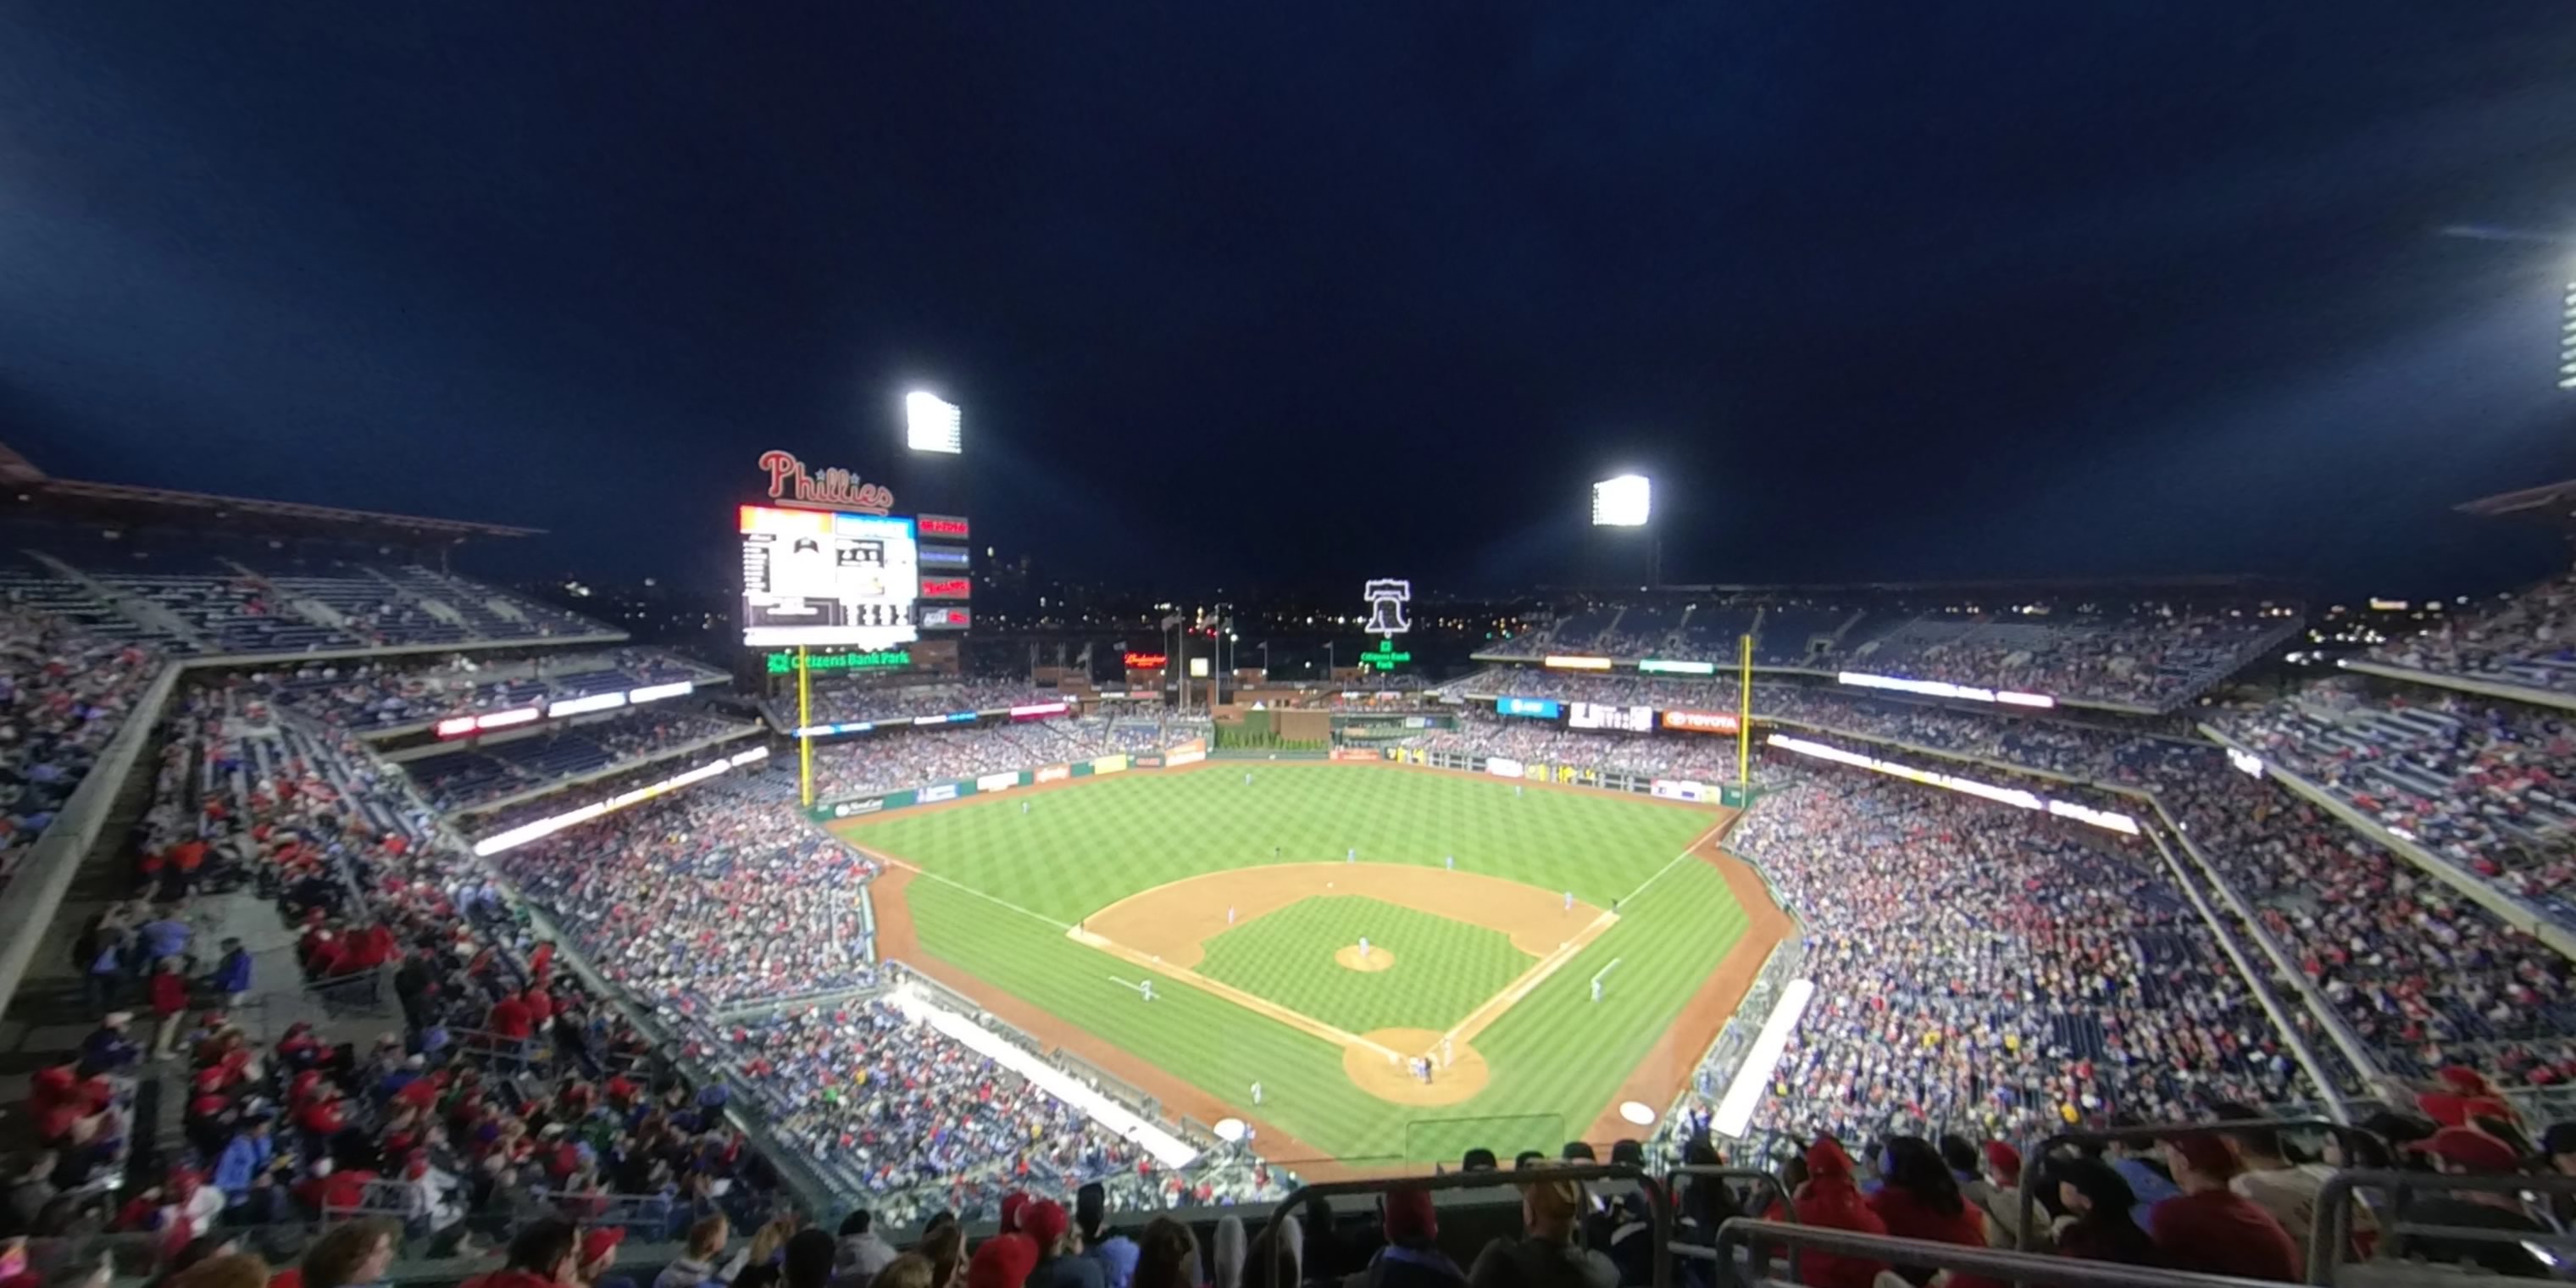 section 421 panoramic seat view  for baseball - citizens bank park